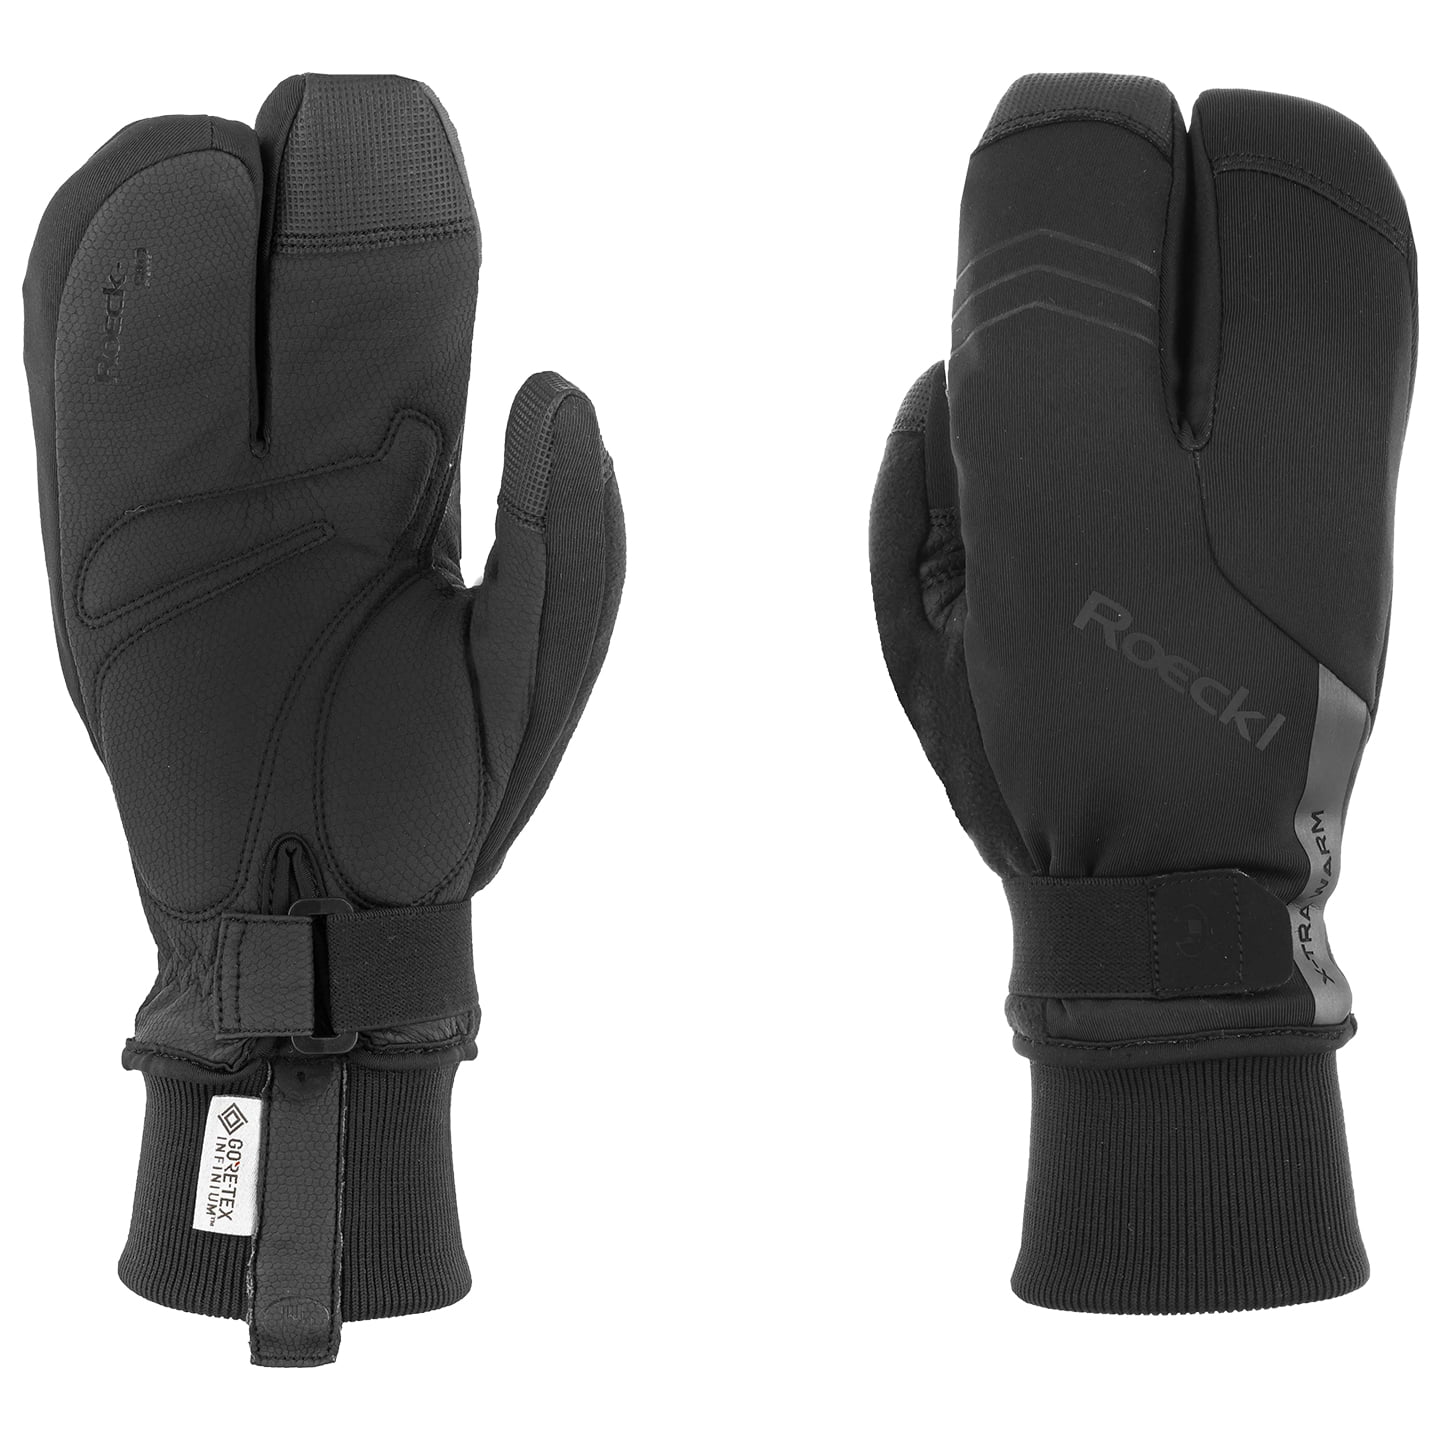 ROECKL Villach 2 Lobster Winter Gloves Winter Cycling Gloves, for men, size 6,5, MTB gloves, Bike clothes